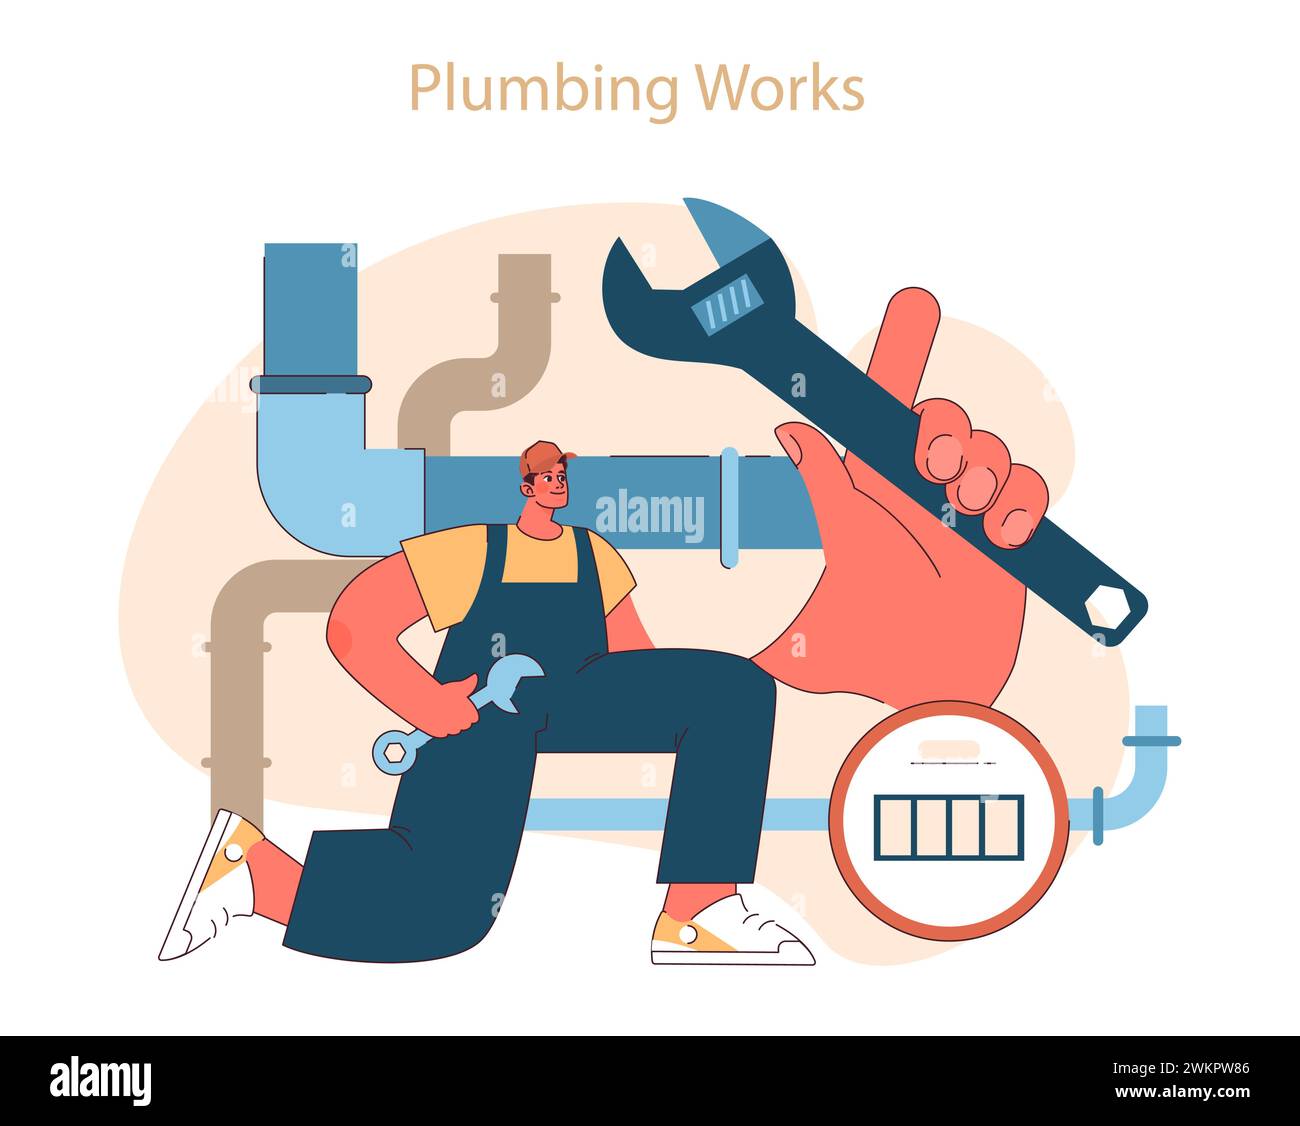 Plumbing works. A skilled plumber with tools at the ready for pipe repairs and maintenance, ensuring system efficiency. Flat vector illustration Stock Vector